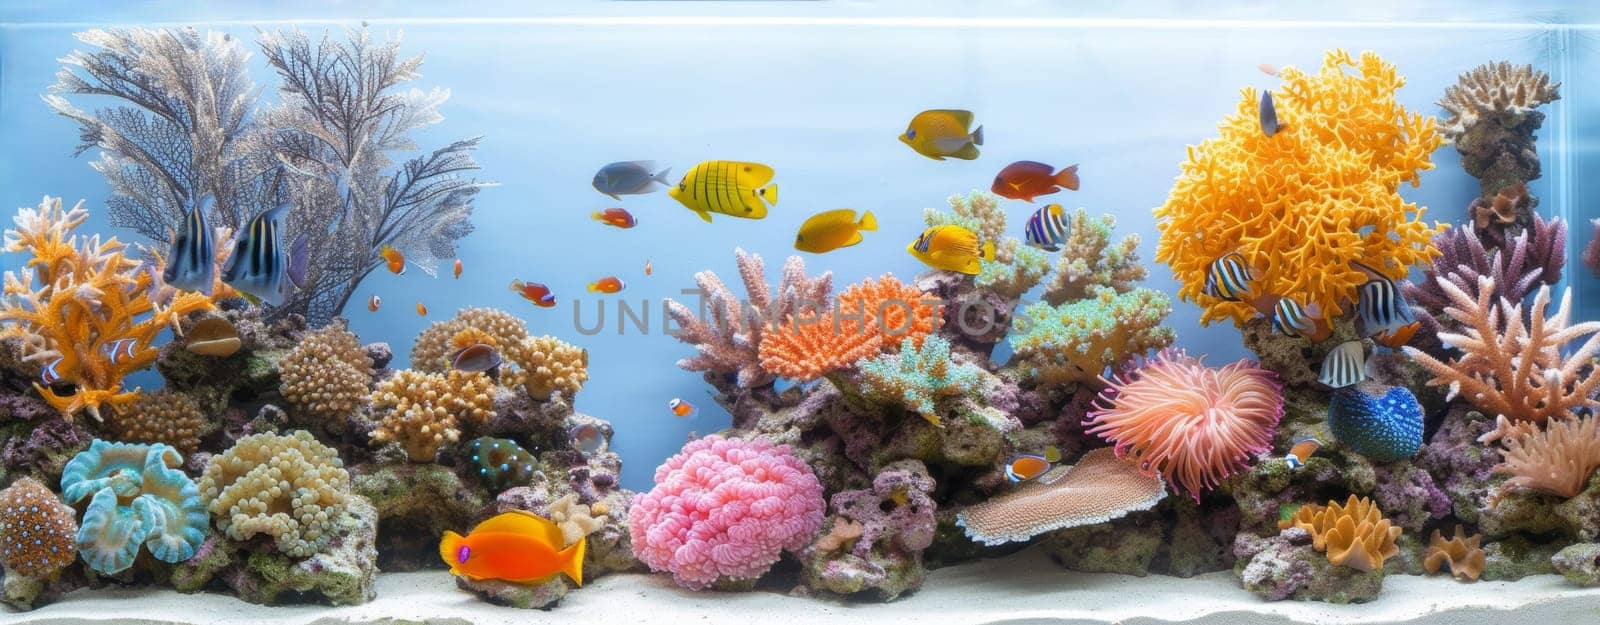 Vibrant underwater scene with colorful corals and tropical fish in a clear aquarium